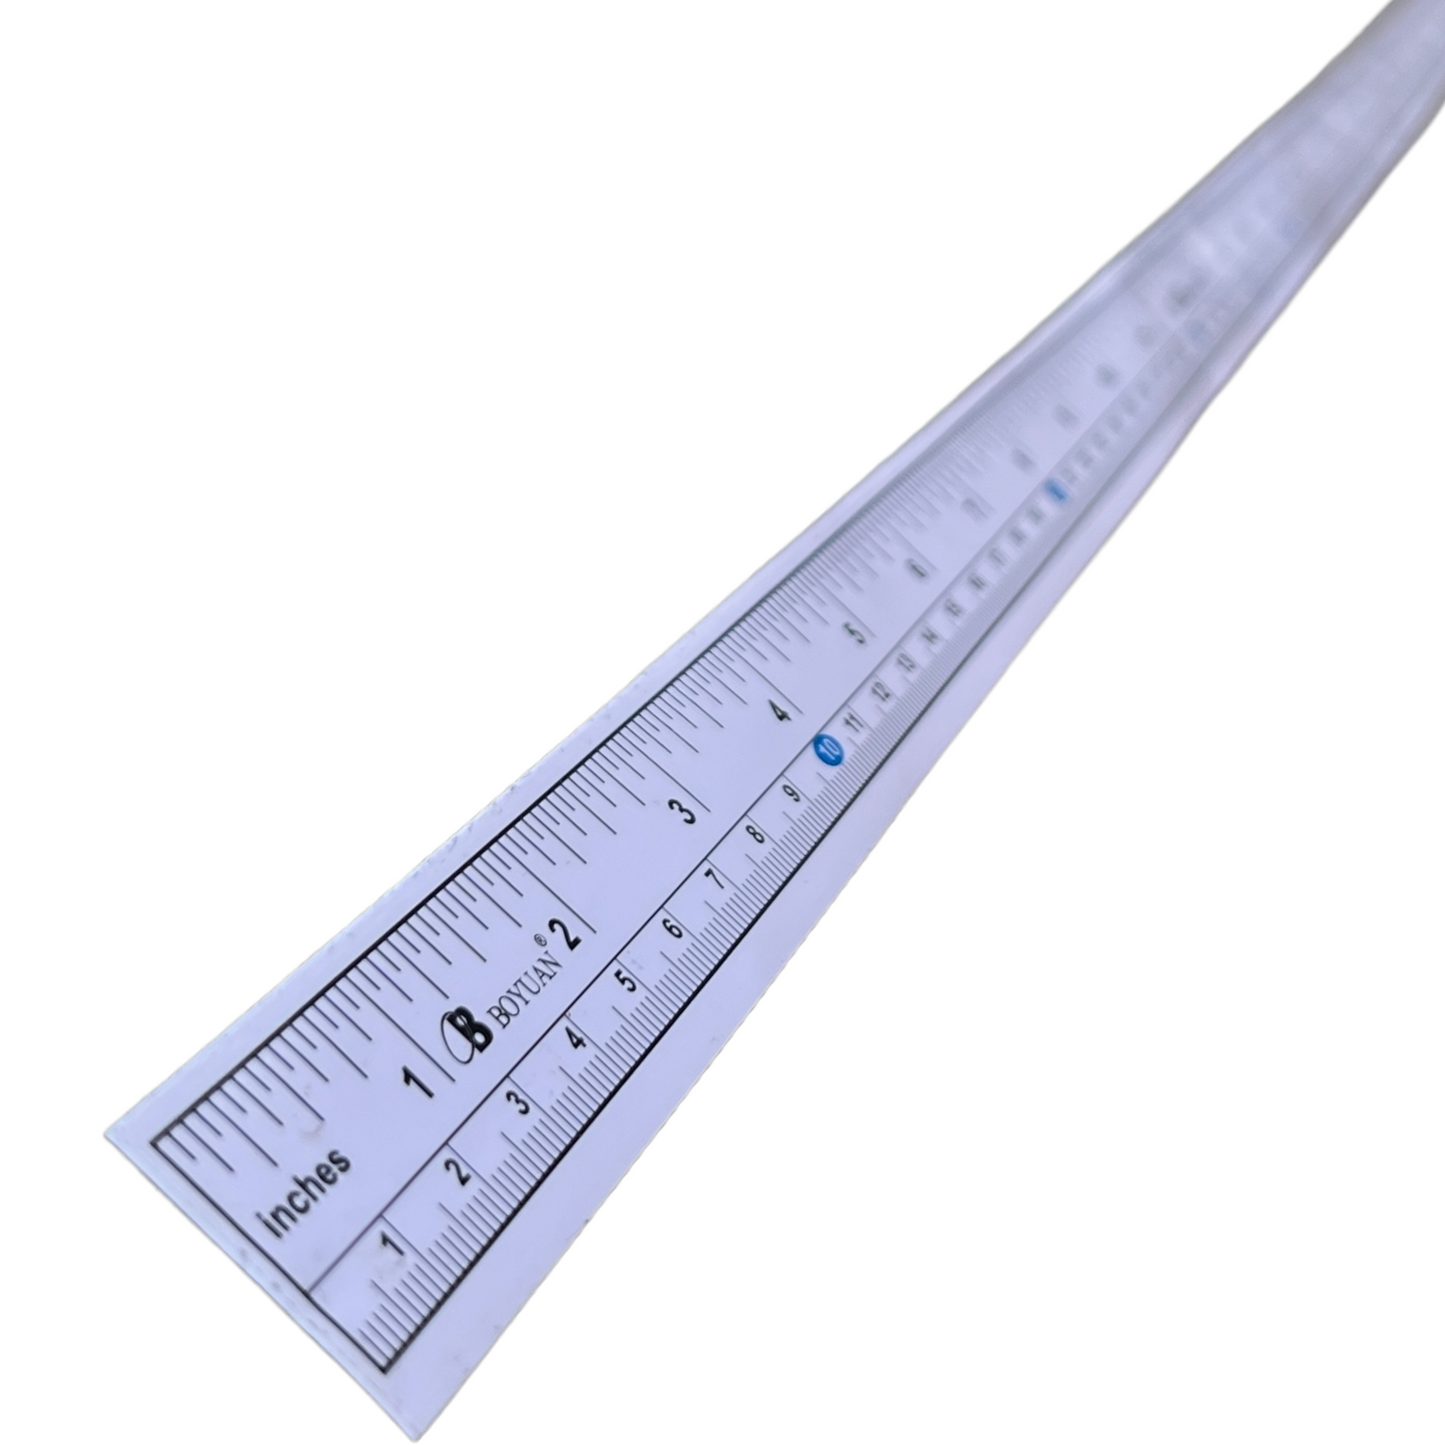 Adhesive Ruler for Crafts  SPIRIT SPARKPLUGS   